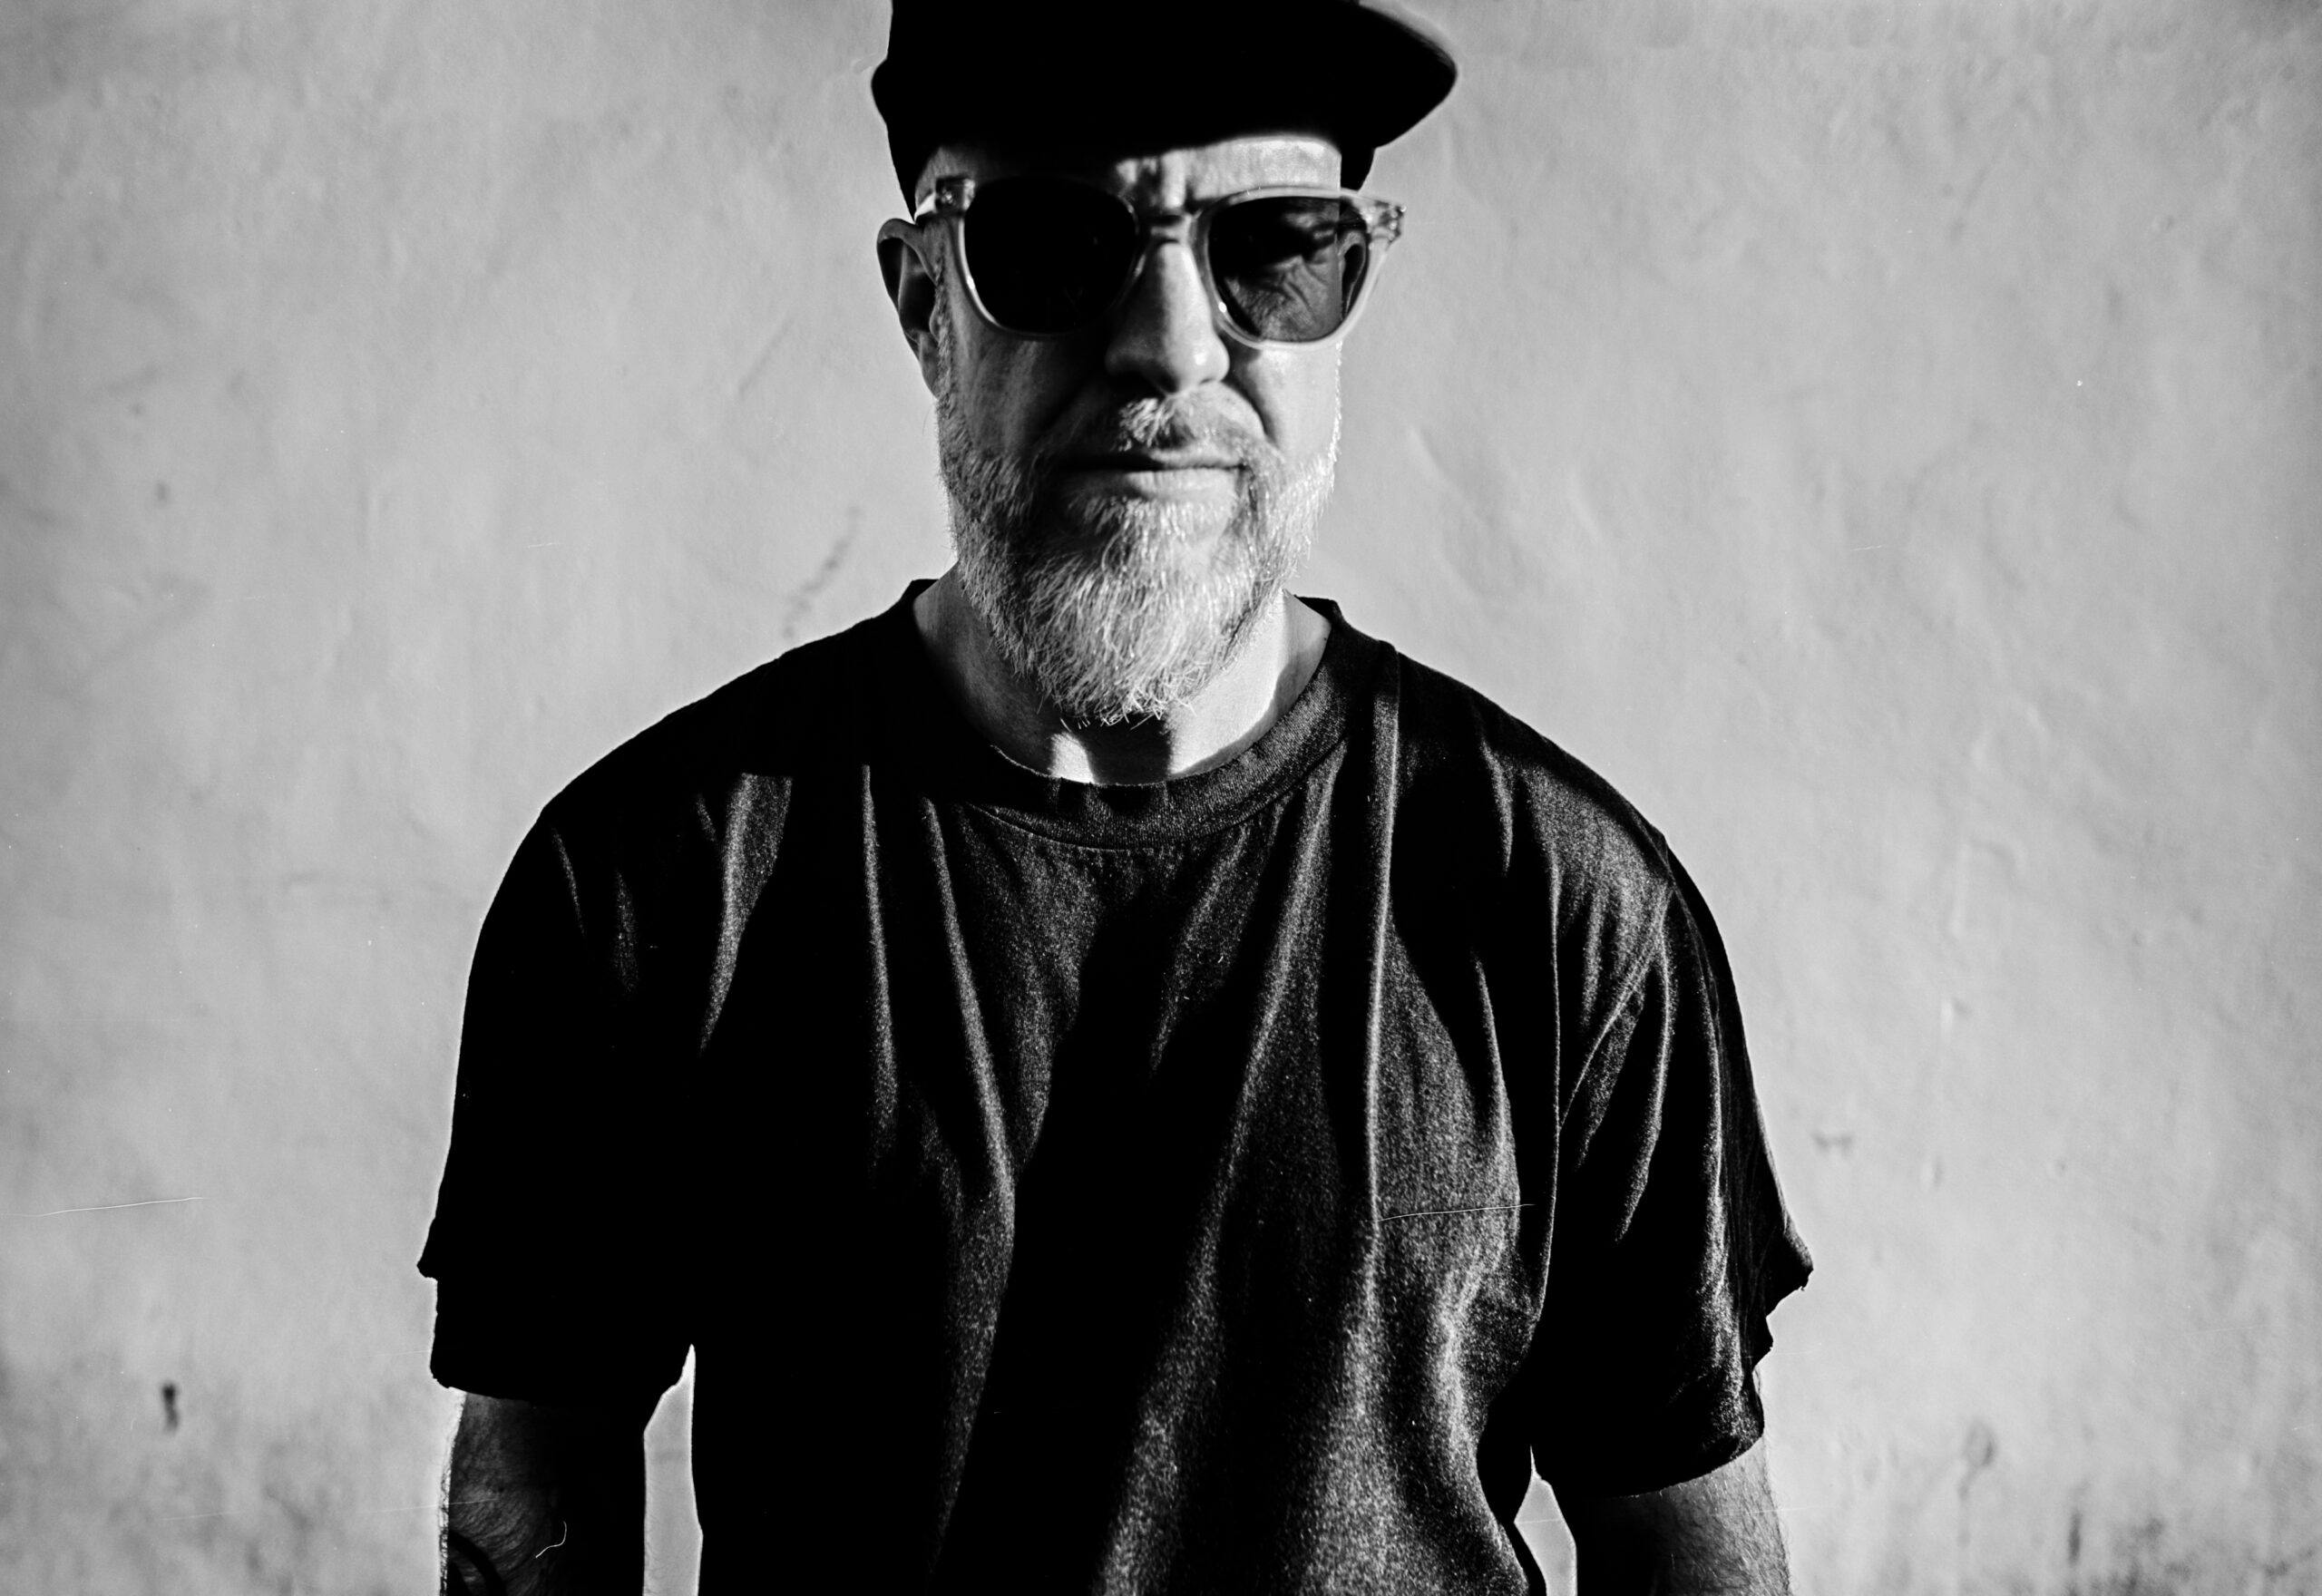 Swedish DJ, founder of Local Talk and GAMM record labels, former b-boy and Stockholm legend Mad Mats joins BBE with album 'Digging Beyond The Crates'